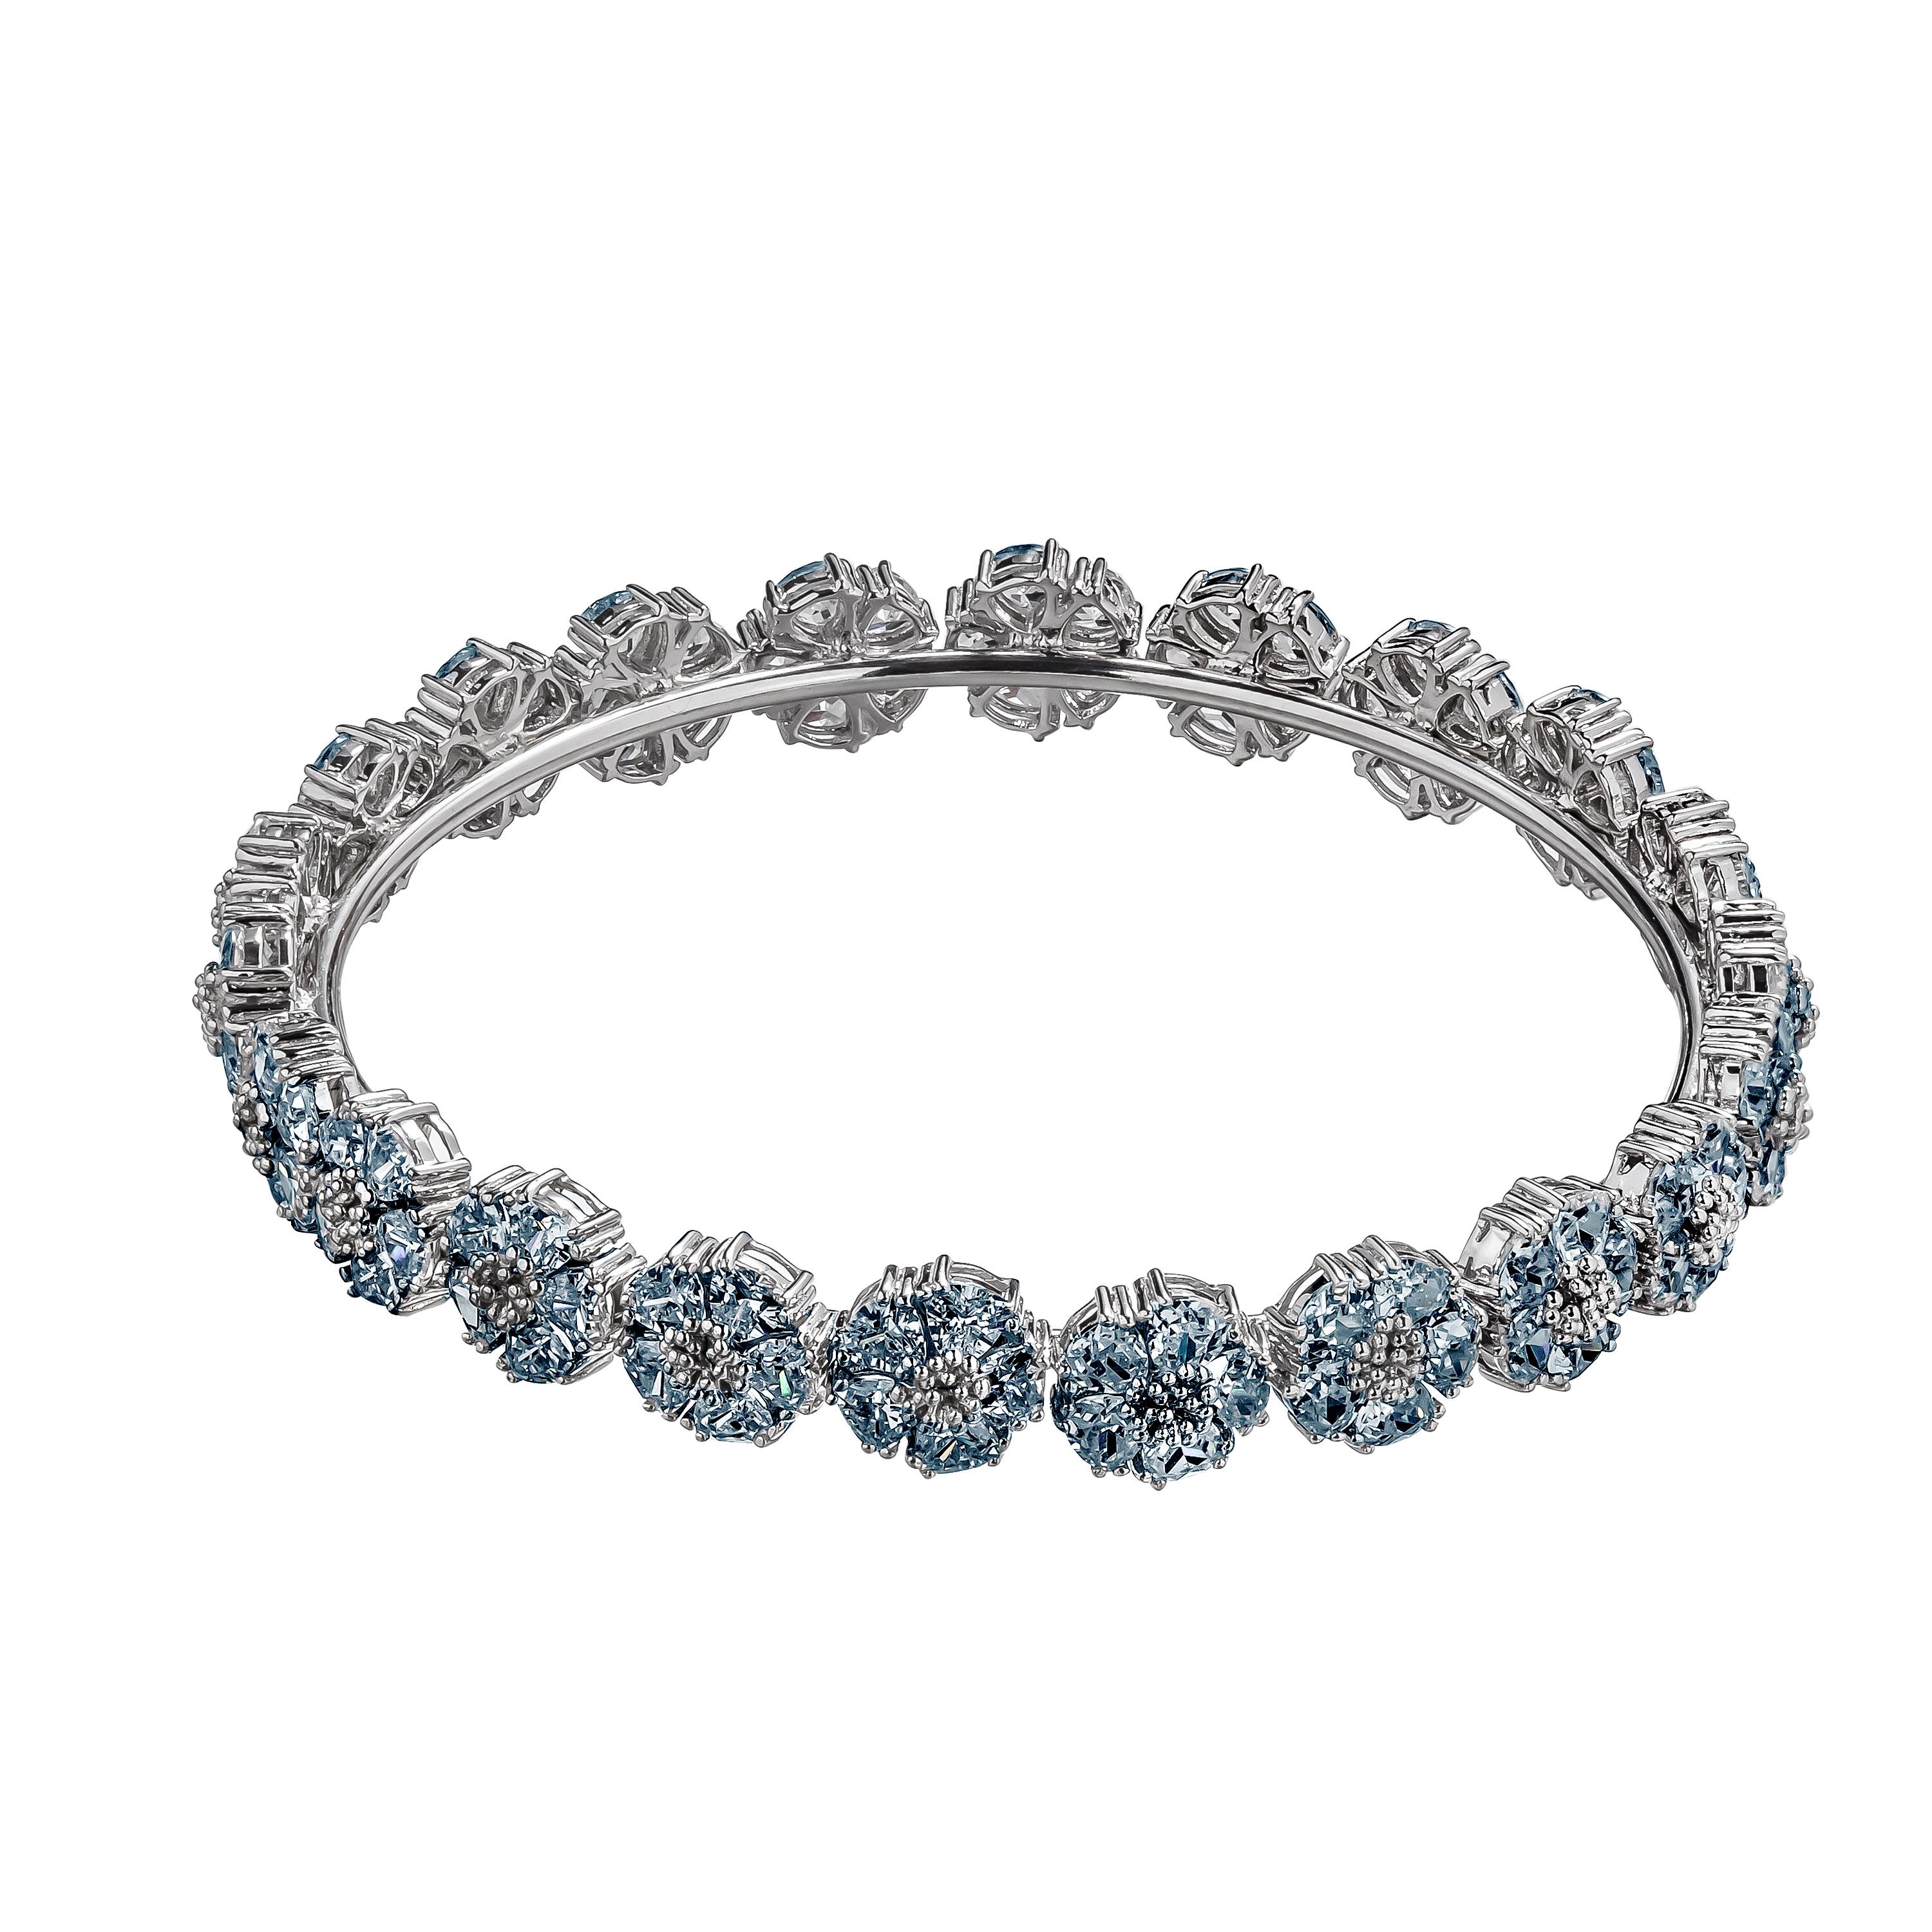 Designed in NYC

.925 Sterling Silver 10 x 10 mm White Topaz Blossom Gemstone Wraparound Bracelet.  No matter the season, allow natural beauty to surround you wherever you go. Blossom gemstone wraparound bracelet: 

Sterling silver